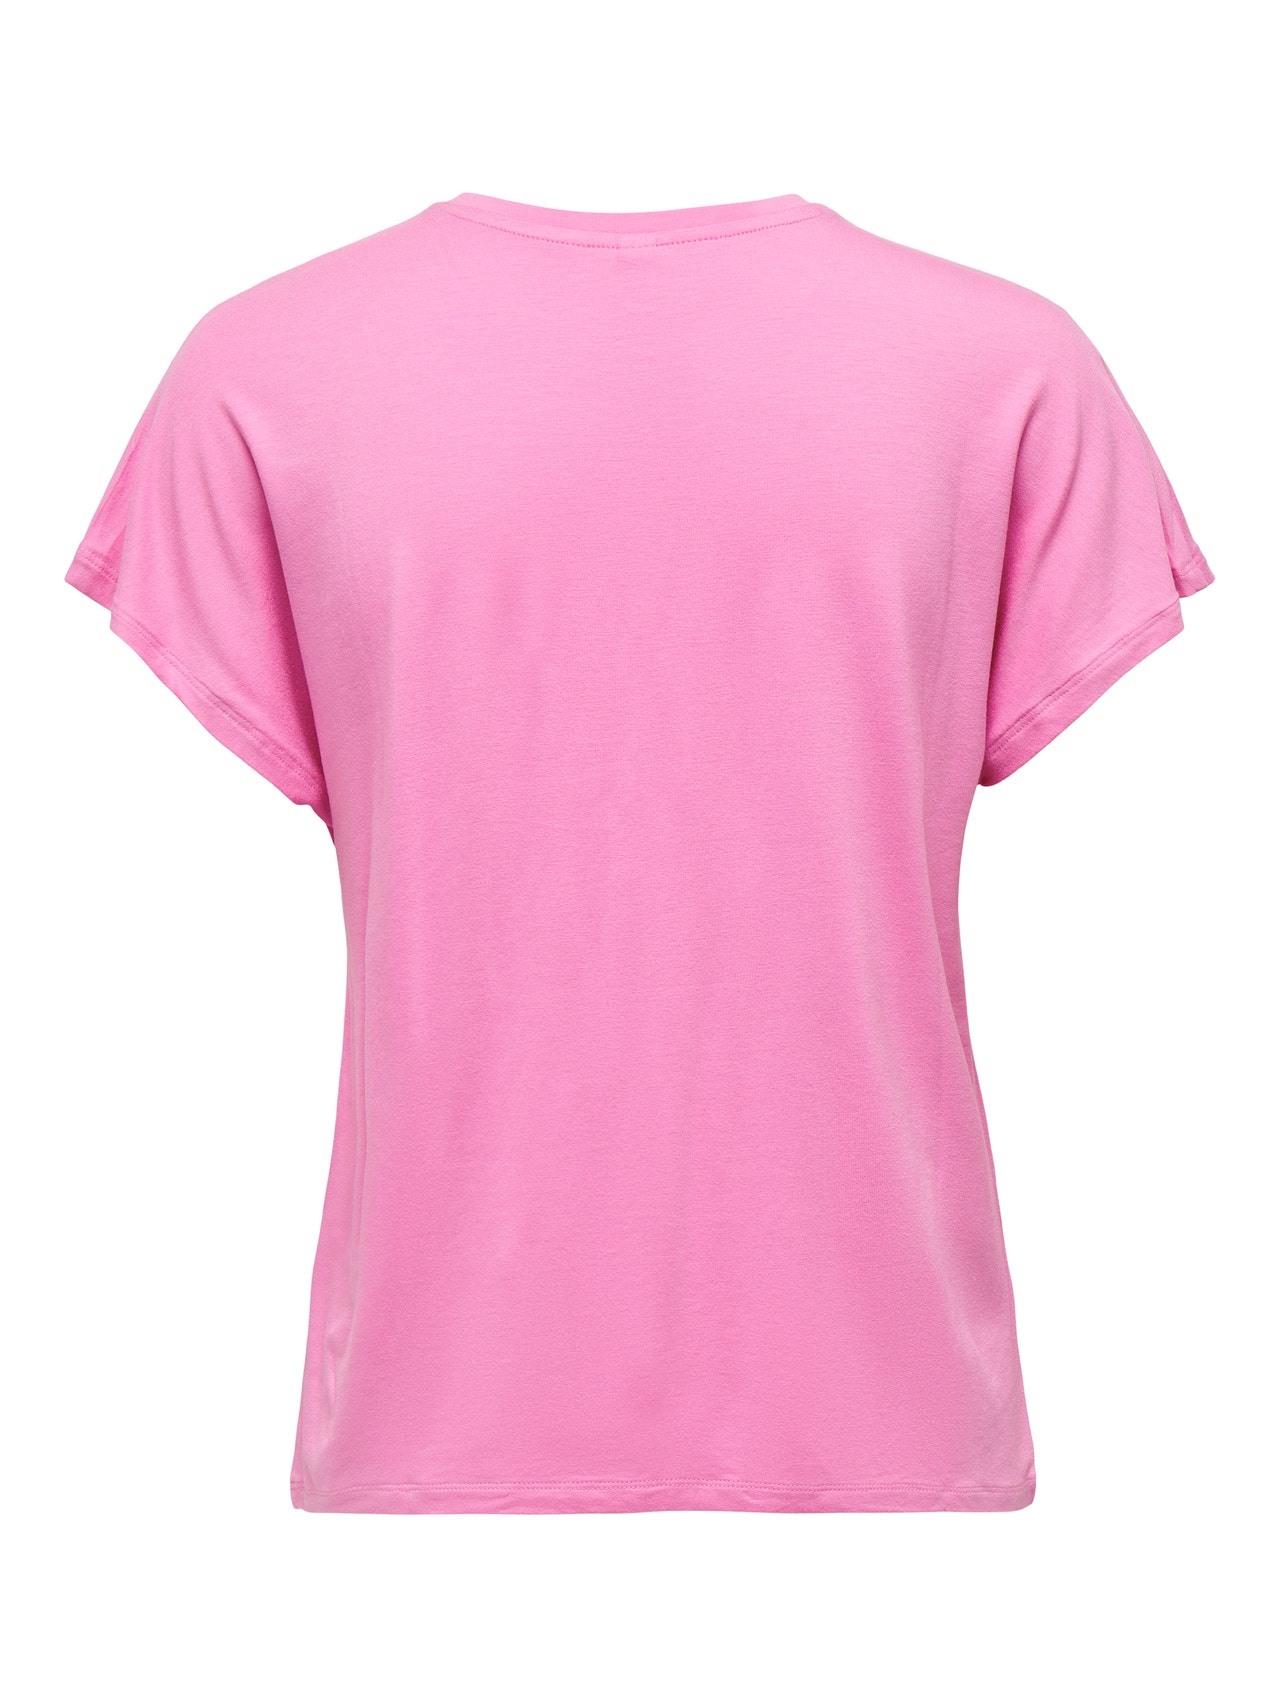 ONLY Regular Fit Round Neck Top -Fuchsia Pink - 15257232